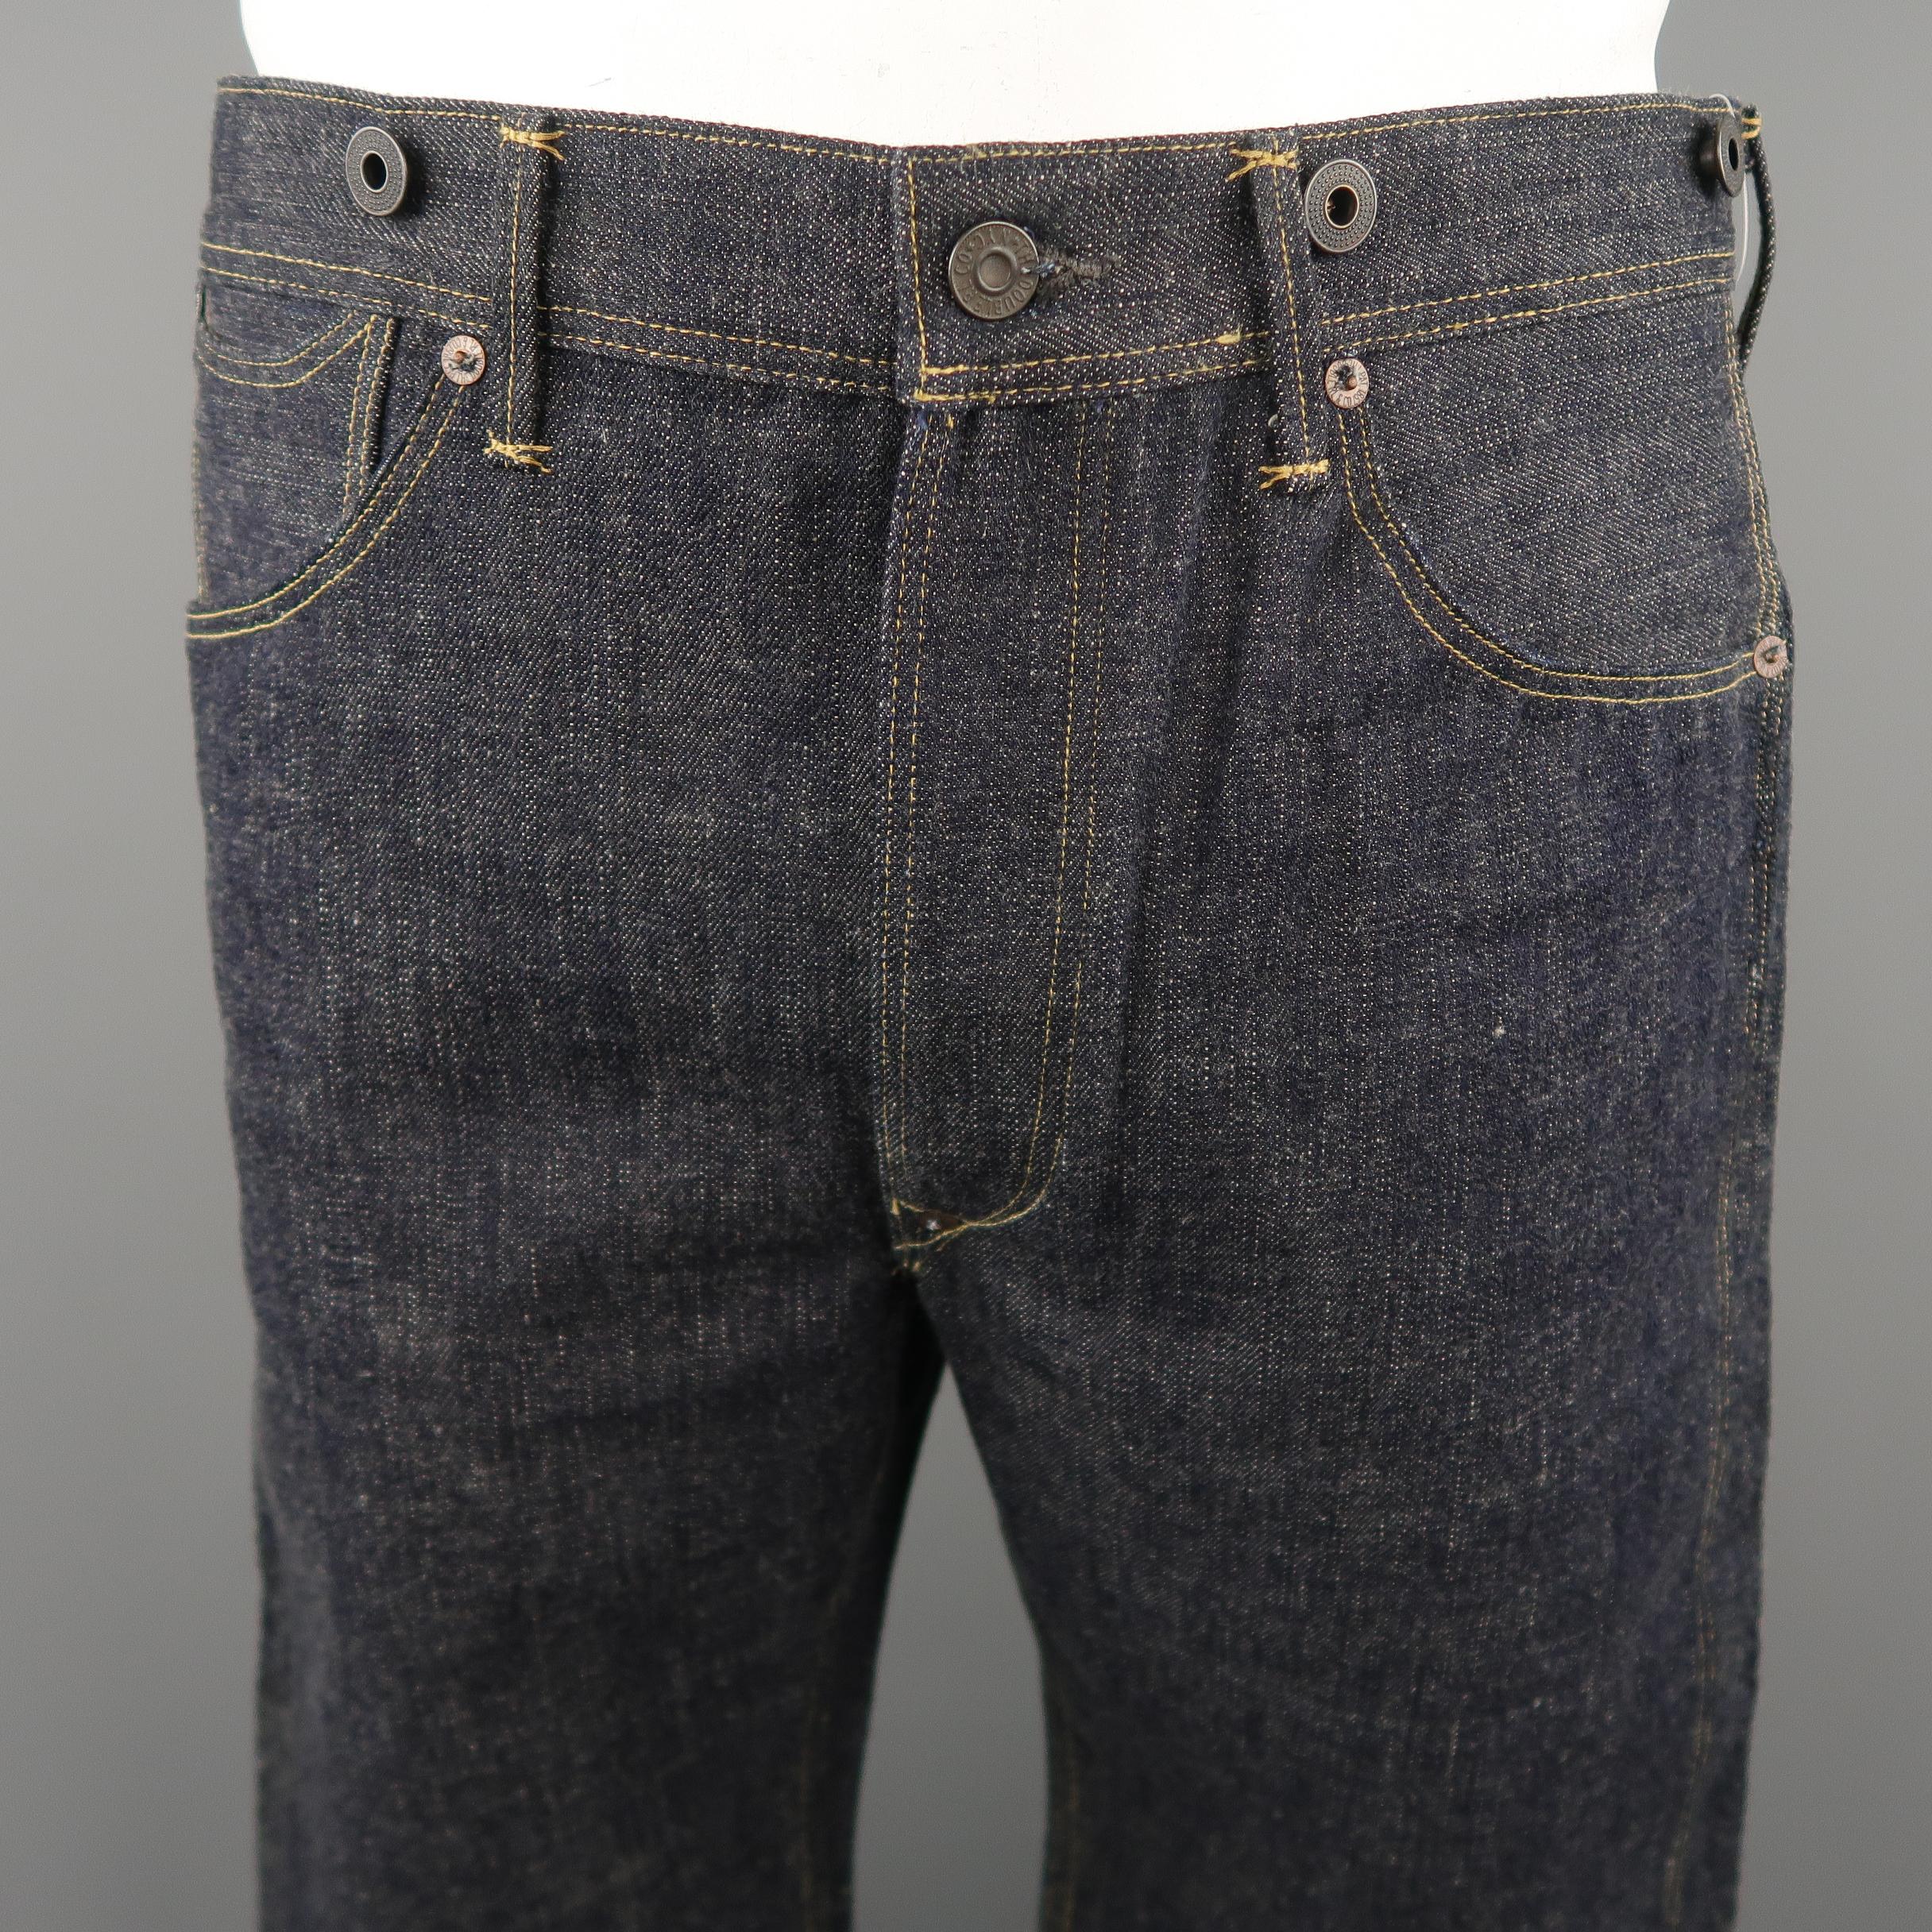 RRL by RALPH LAUREN jeans come in indigo solid denim material, with buttons, button fly and back belt. 

Made in USA.
 
New with Tags.
Marked: 34
 
Measurements:
 
Waist:  34  in.
Rise: 12  in.
Inseam:  34  in.